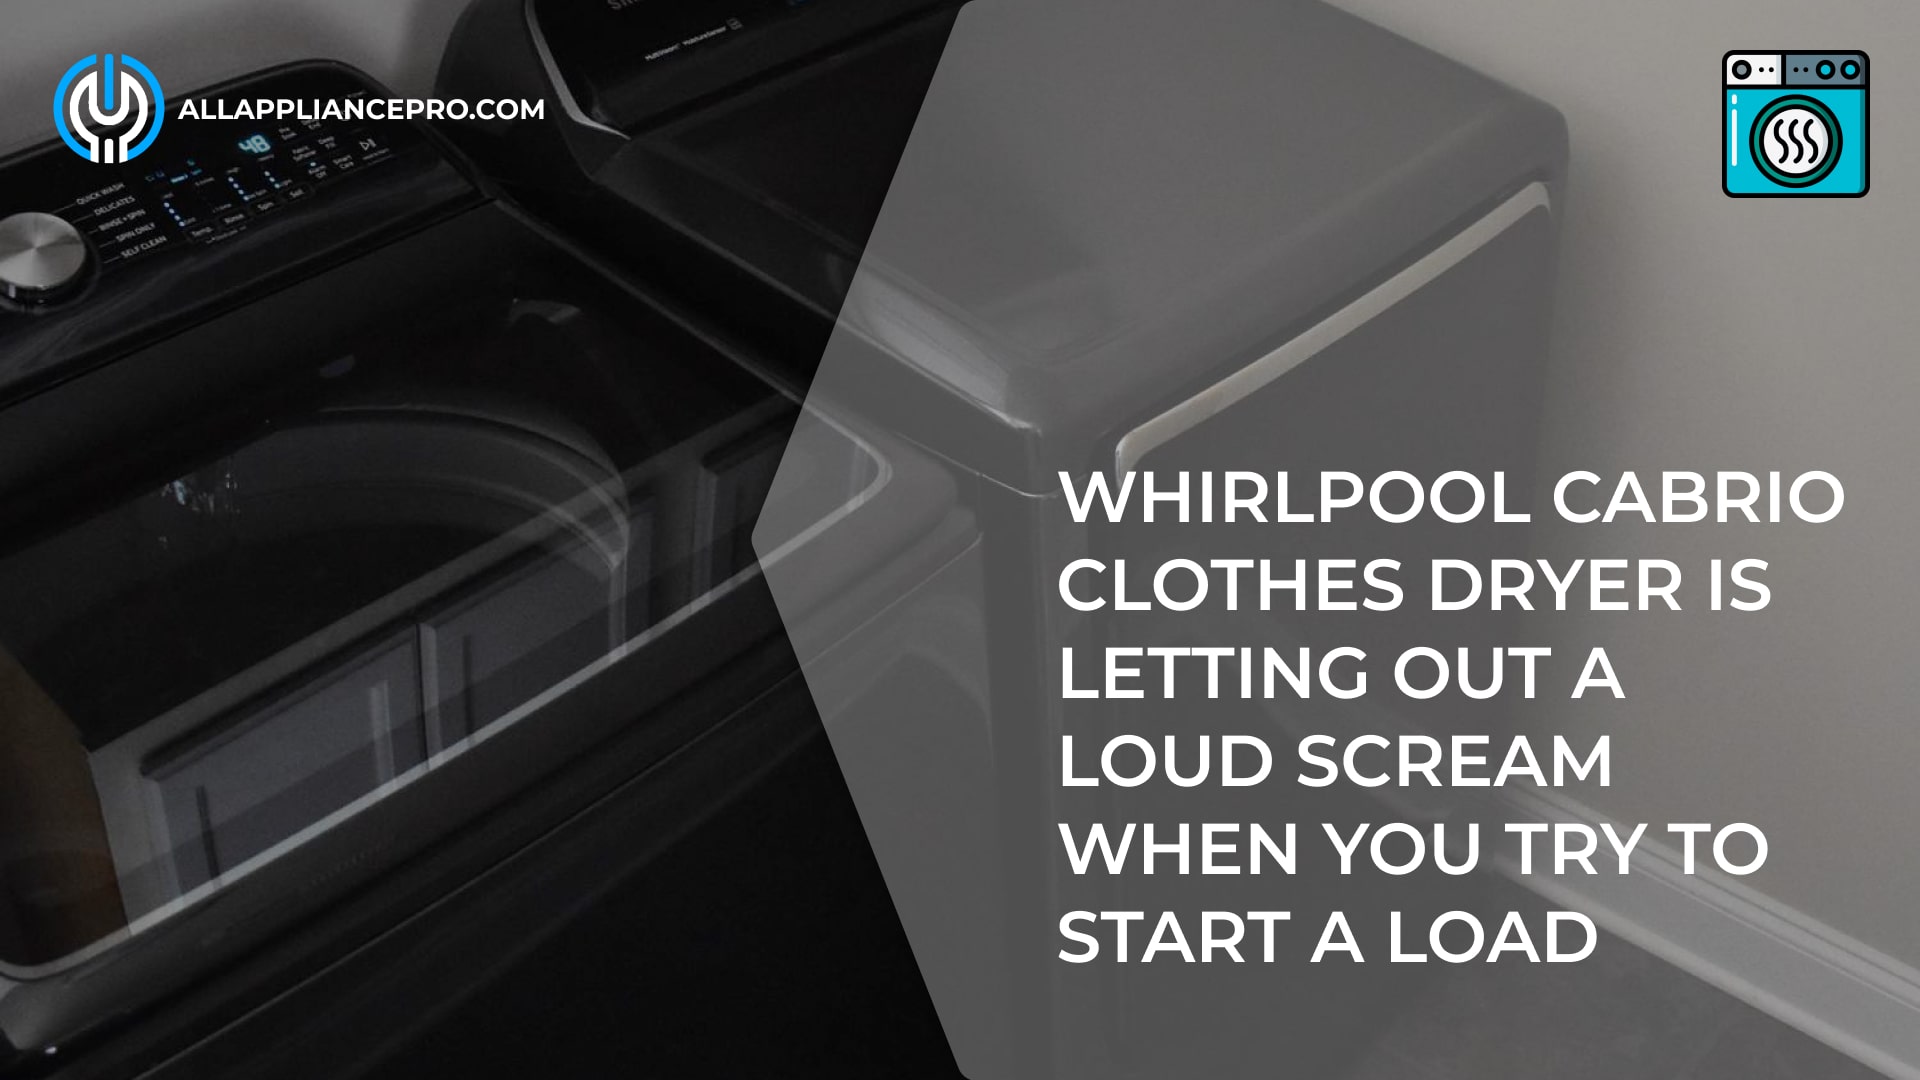 Whirlpool Cabrio Clothes Dryer is Letting out a Loud Scream When you Try to Start a Load